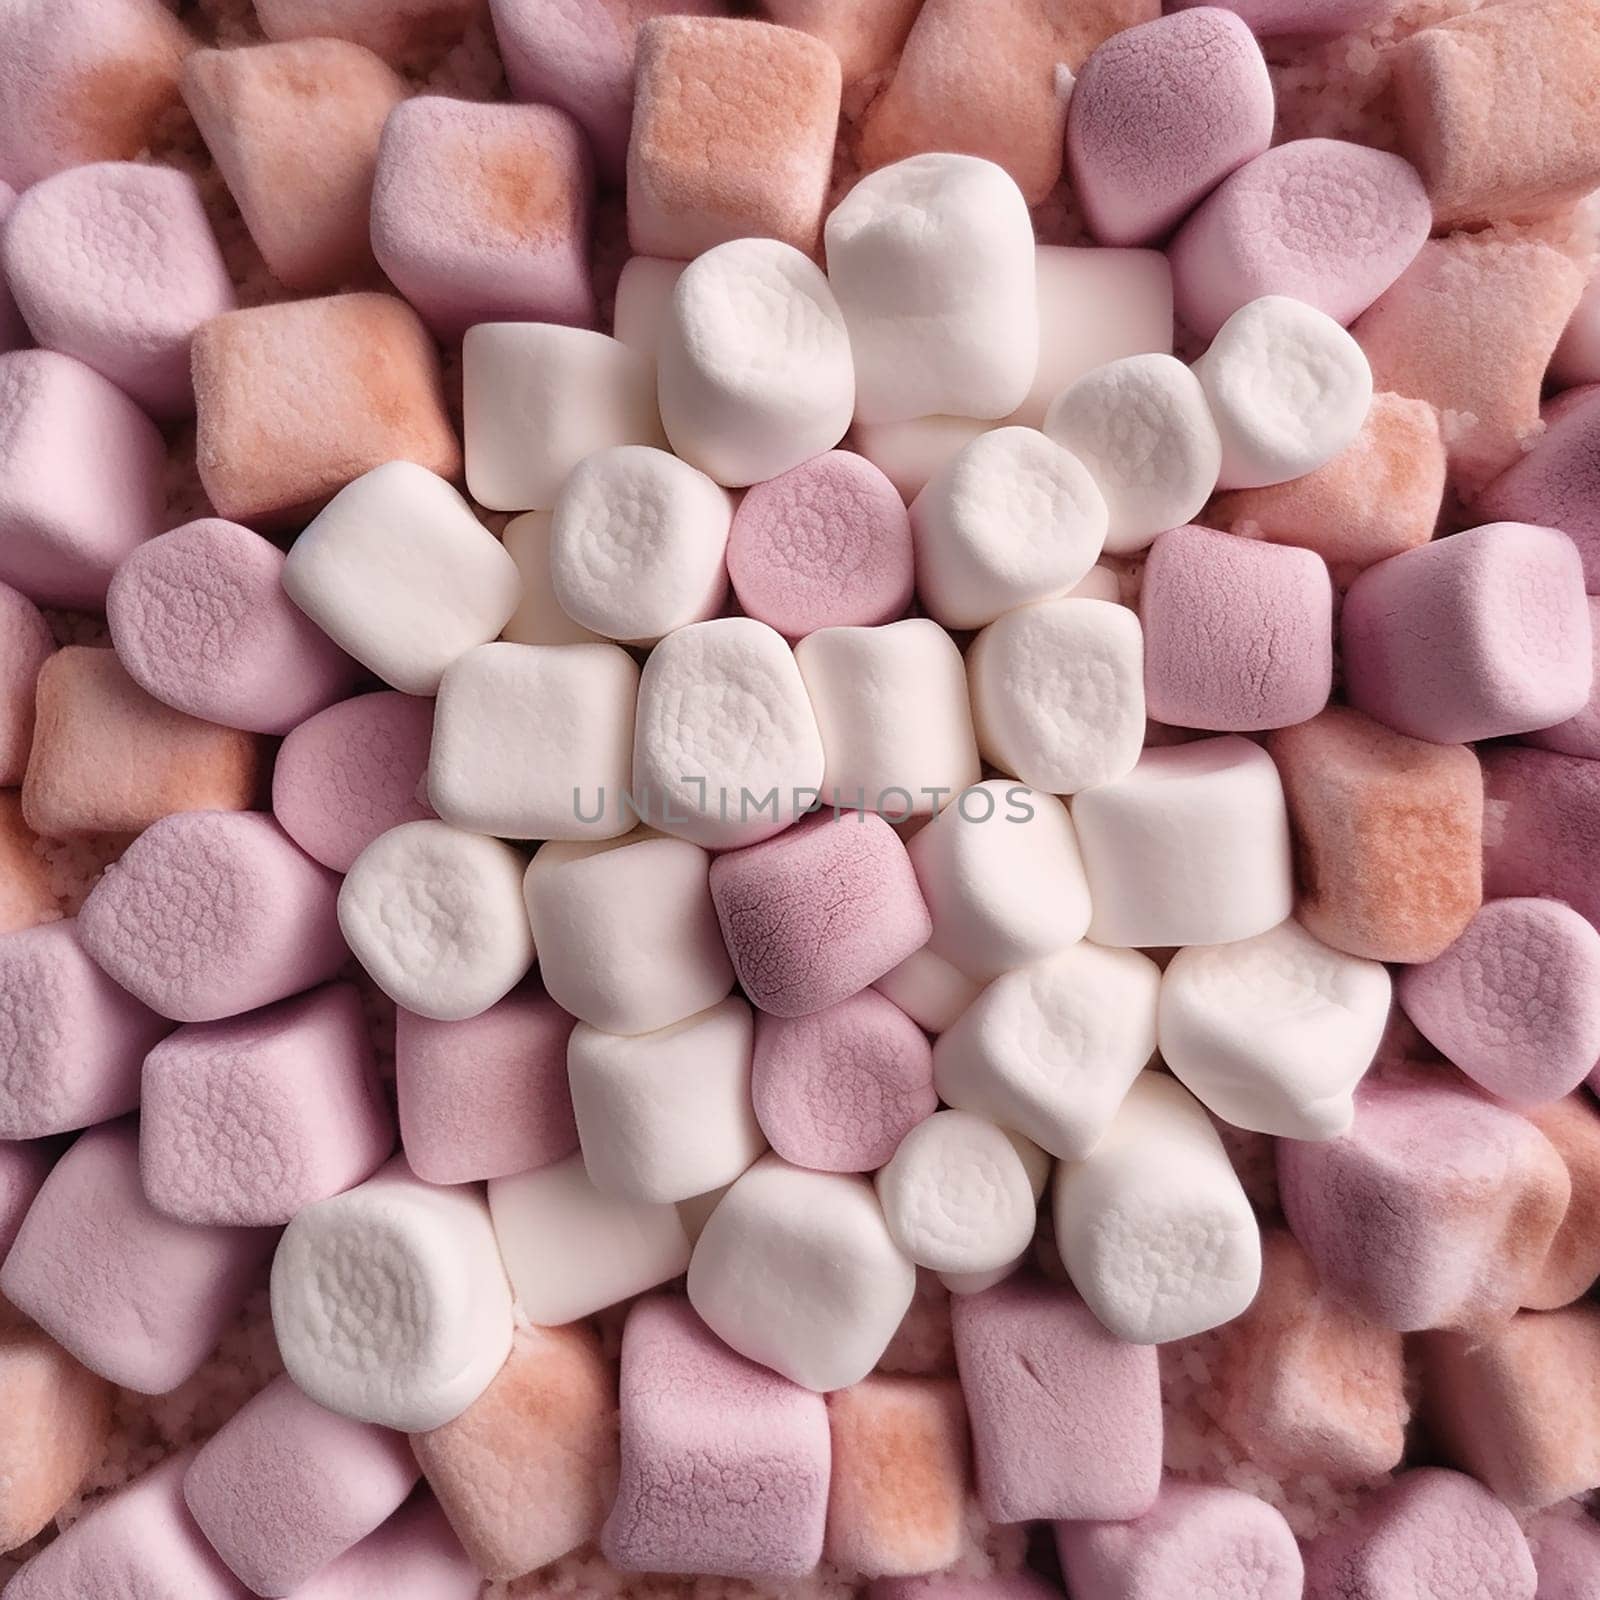 A Close-Up View of Soft and Squishy White and Pink Marshmallows, beautiful background